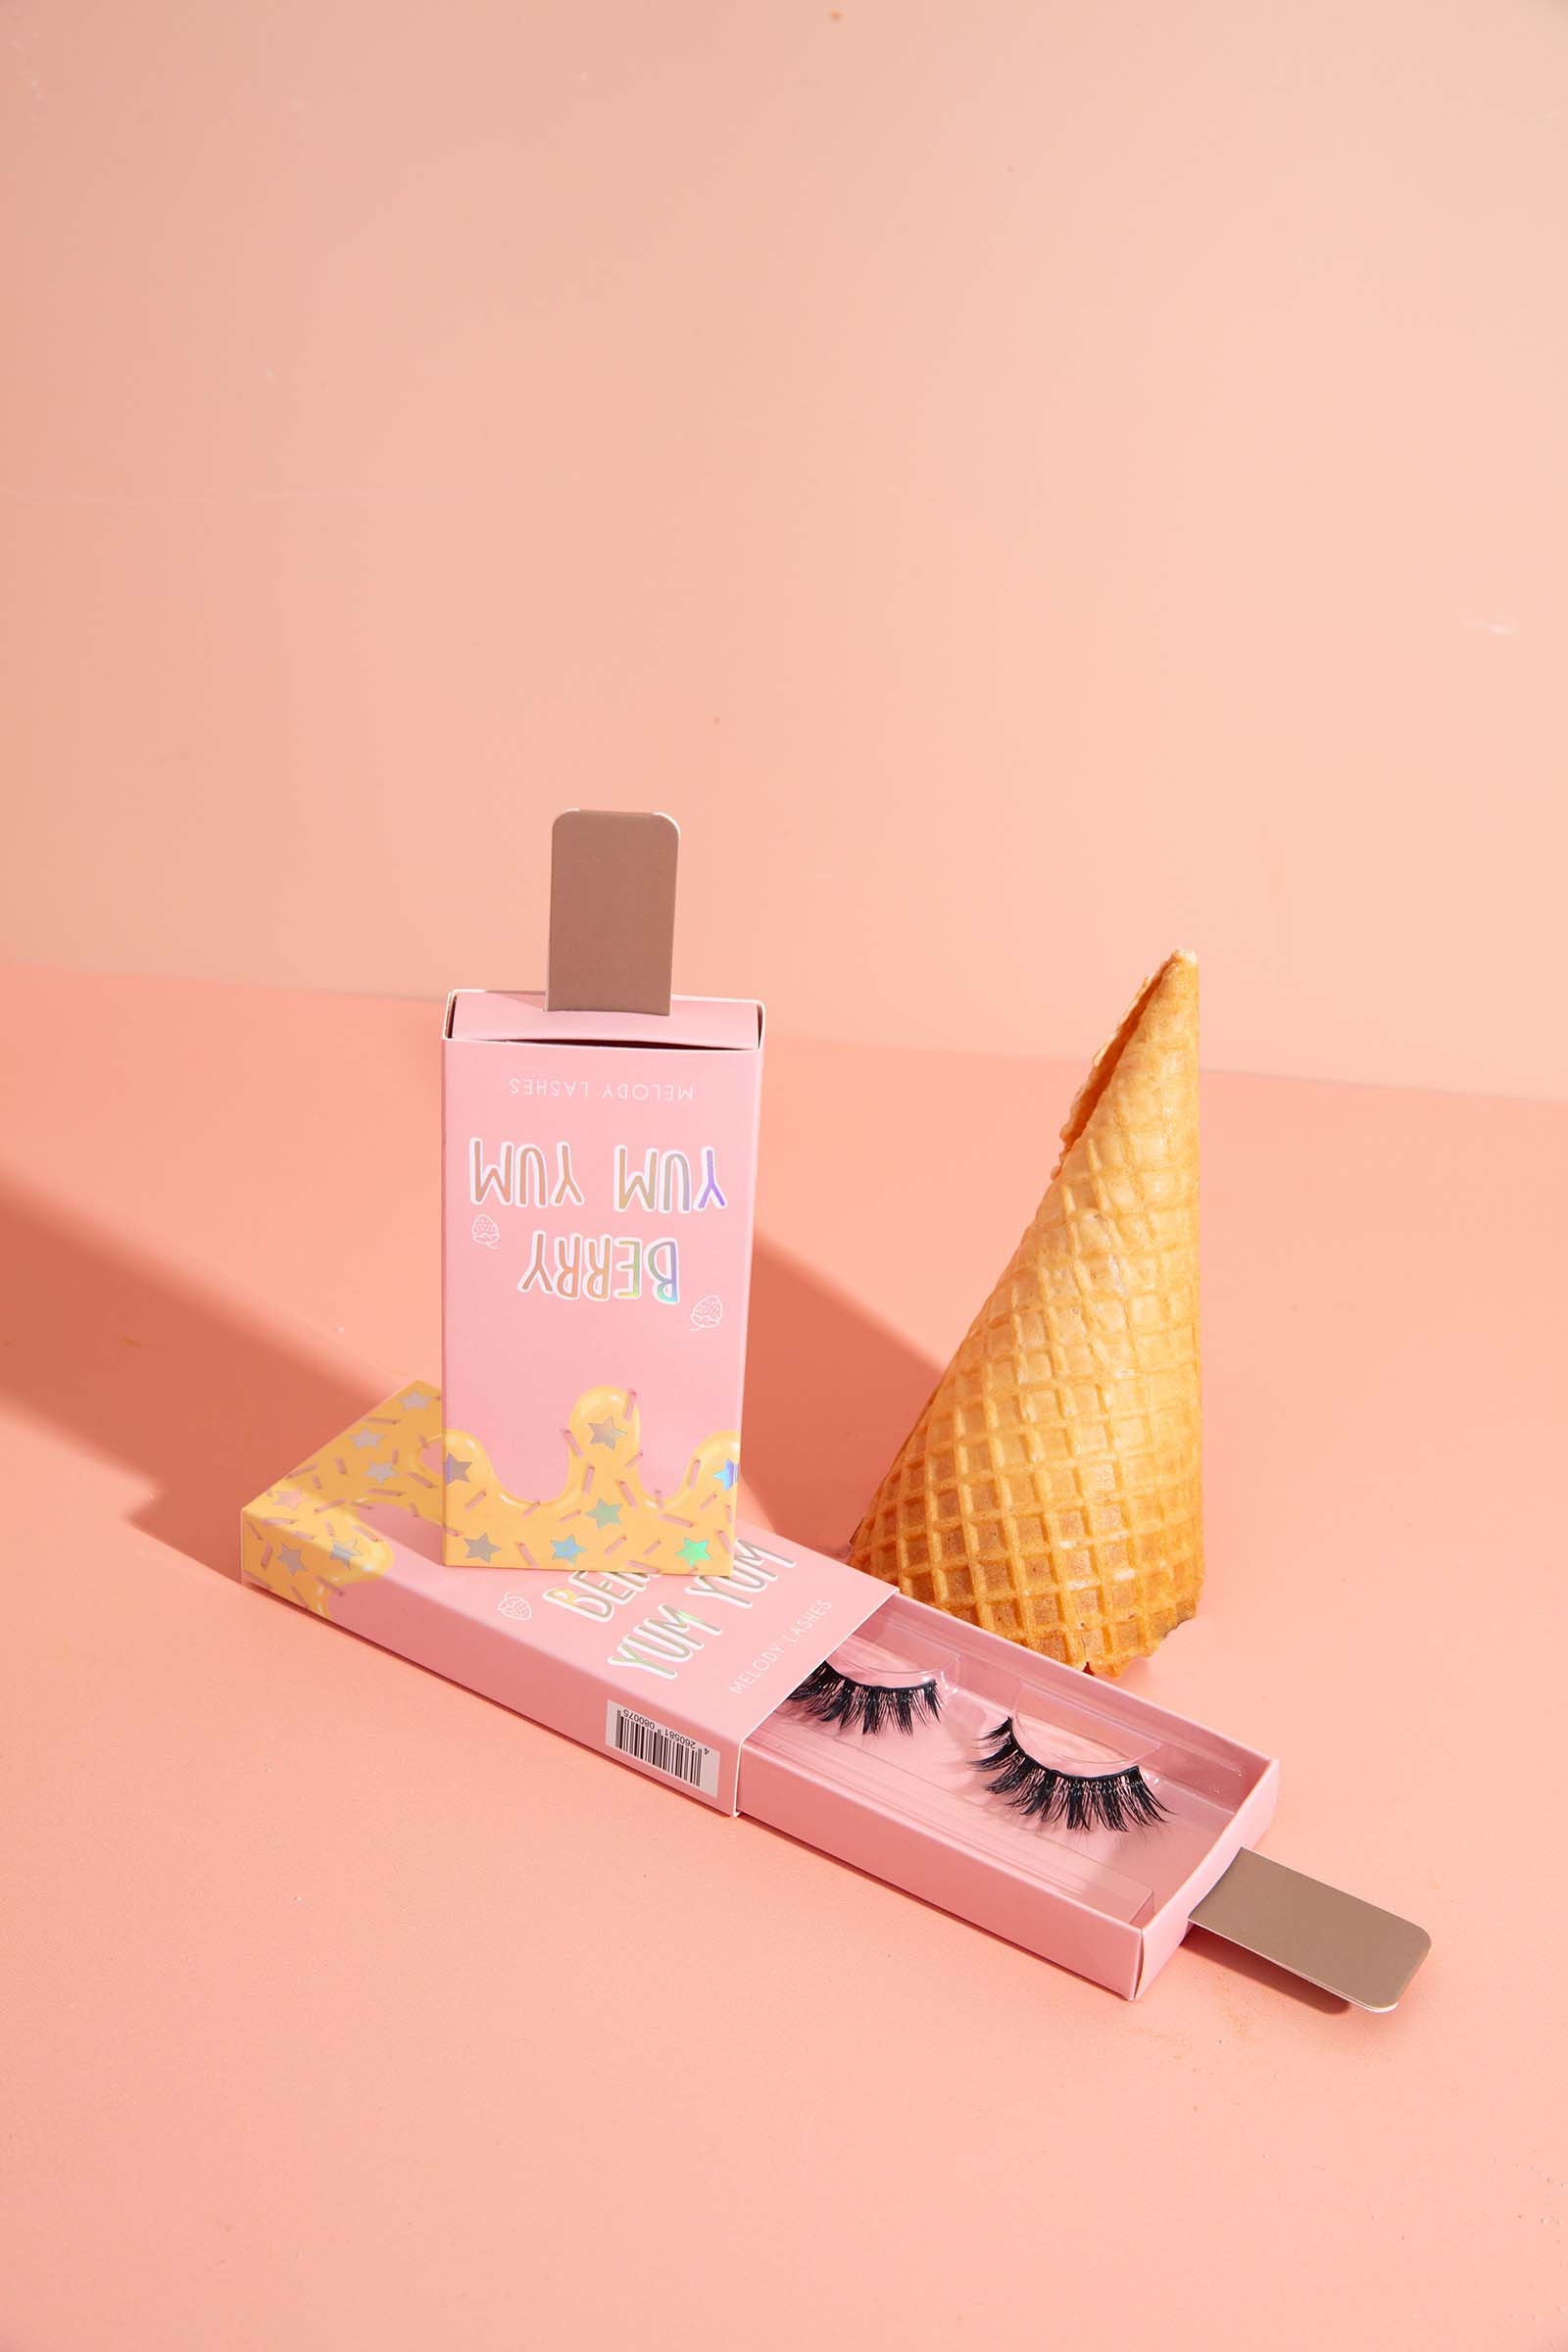 Minimal Product Photography for a False Lash Brand. Styled Product Stills by Colourpop Studio. Minimal Summer Styled Product Photos. Cute summer Product Photo with Ice cream cone. 